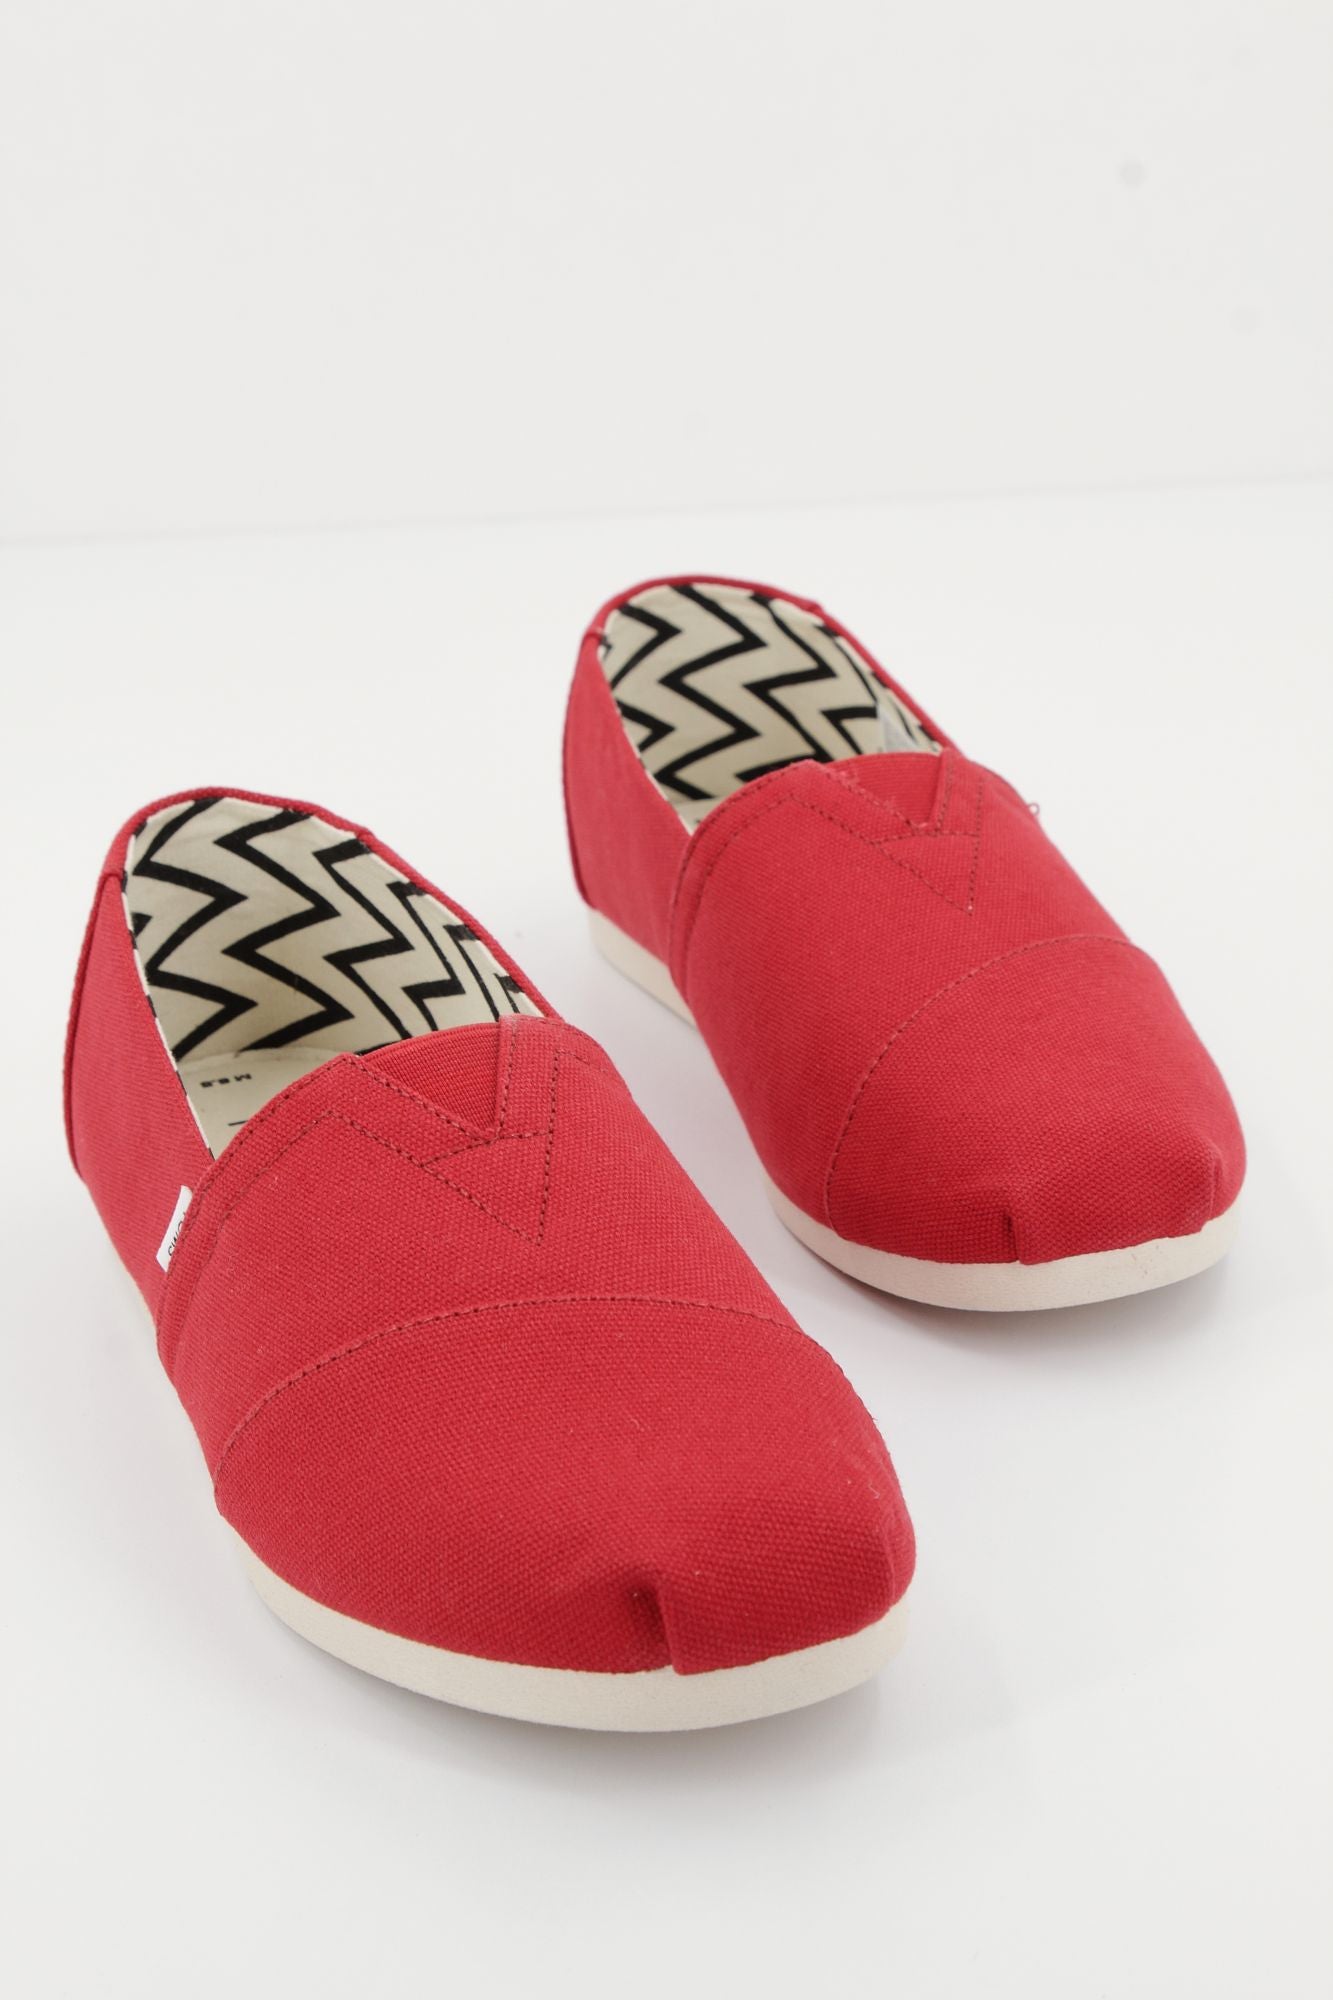 TOMS RED RECYCLED COTTON CANVAS en color ROJO (2)